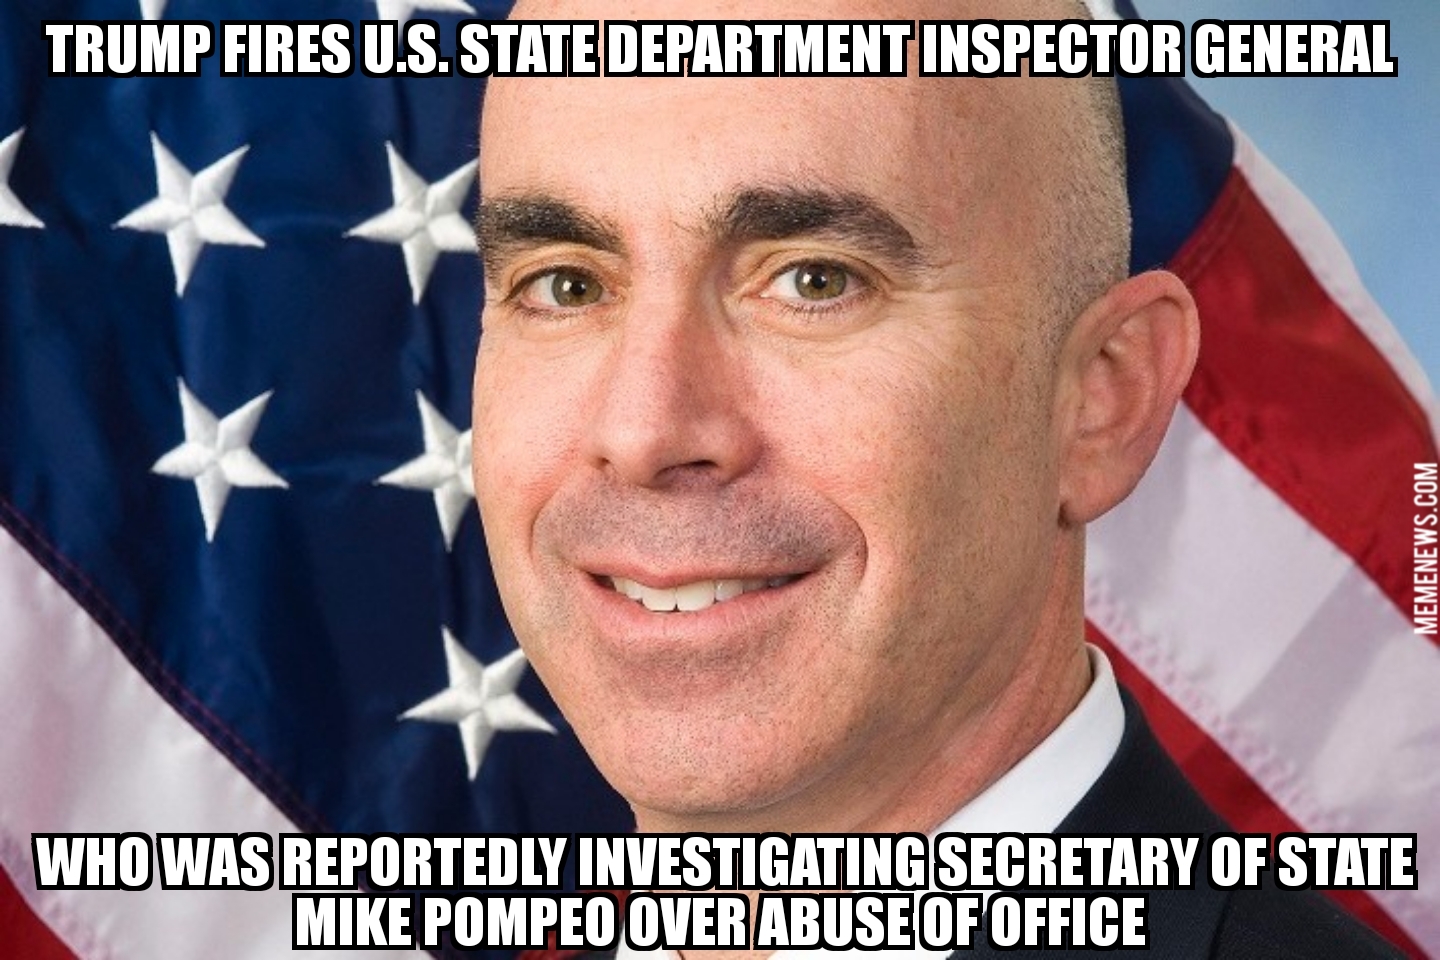 Trump fires State Department inspector general